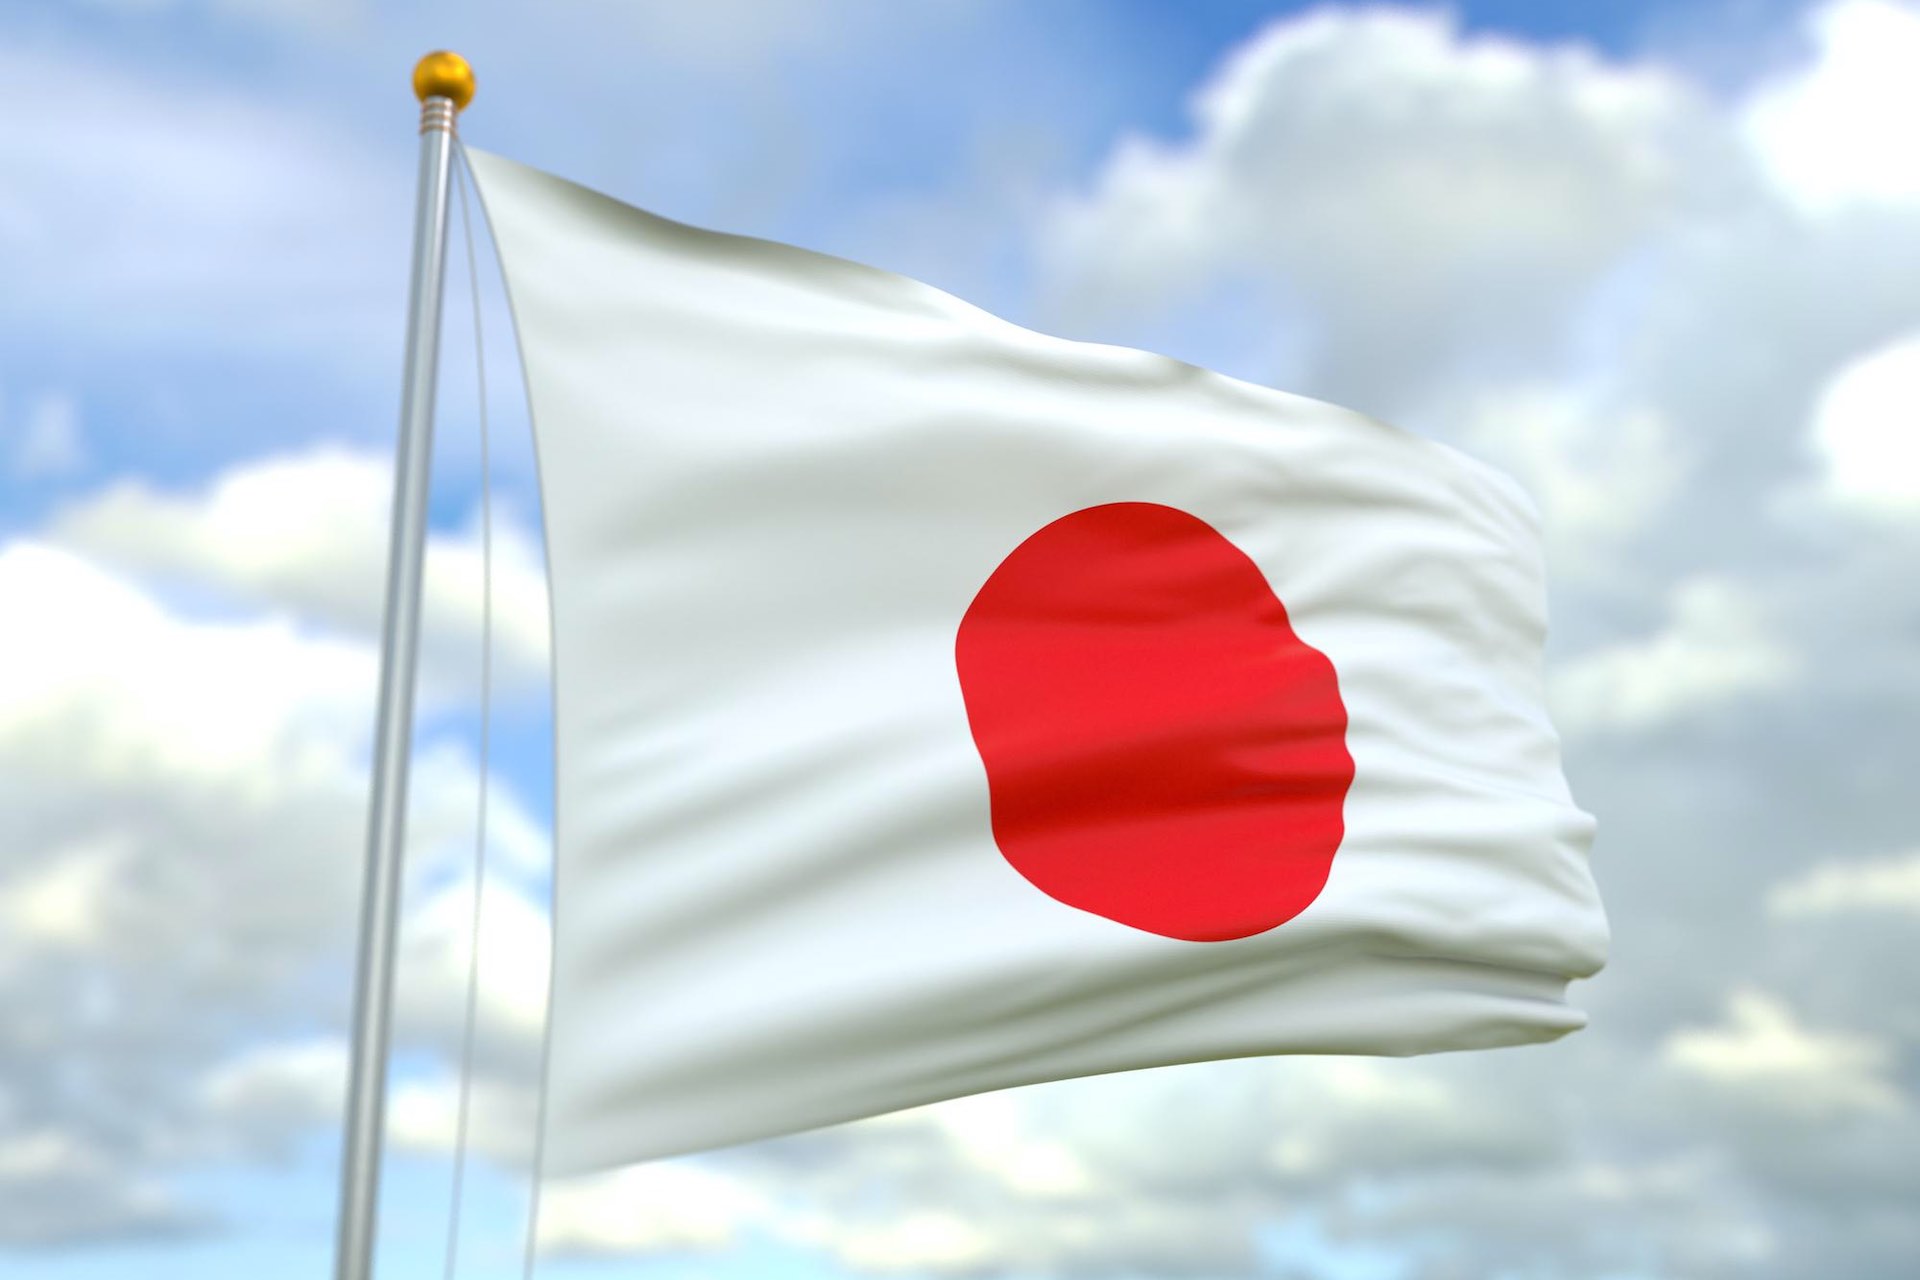 $30 billion aid for Africa will be pledged by Japan at the Tunisia conference